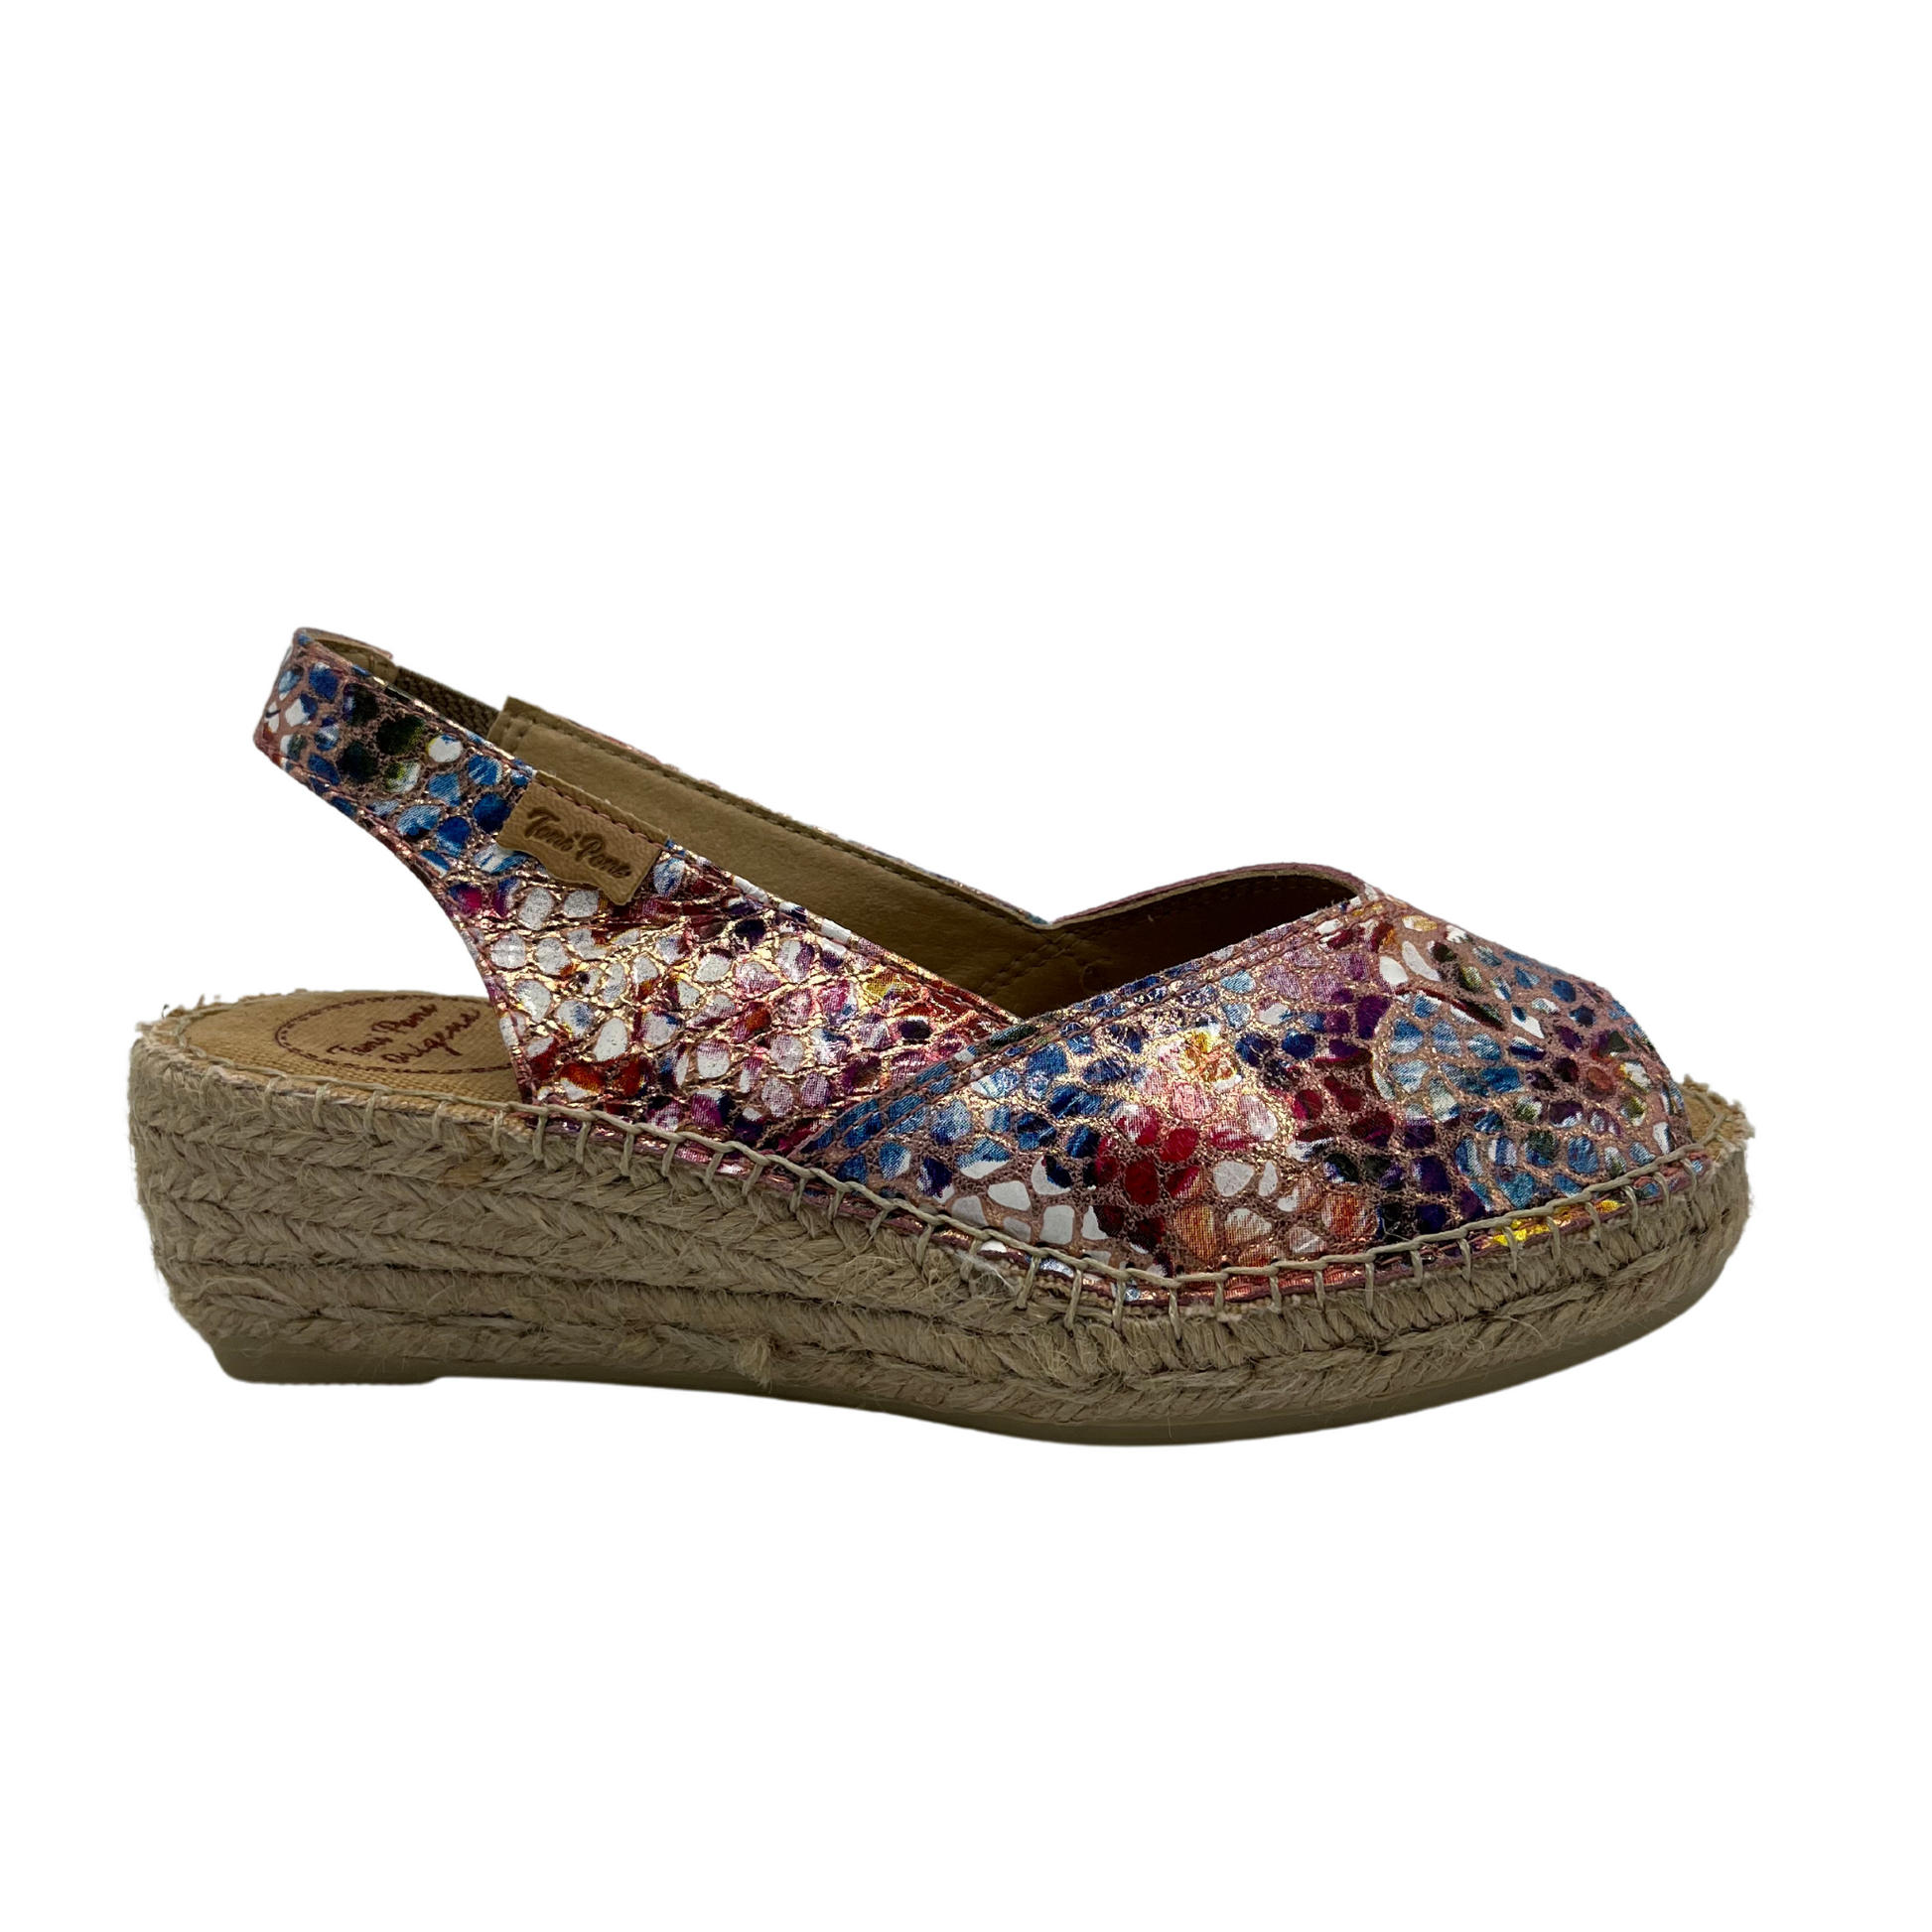 Right facing view of colourful leather upper espadrille shoe with sling back strap and slight wedge heel.